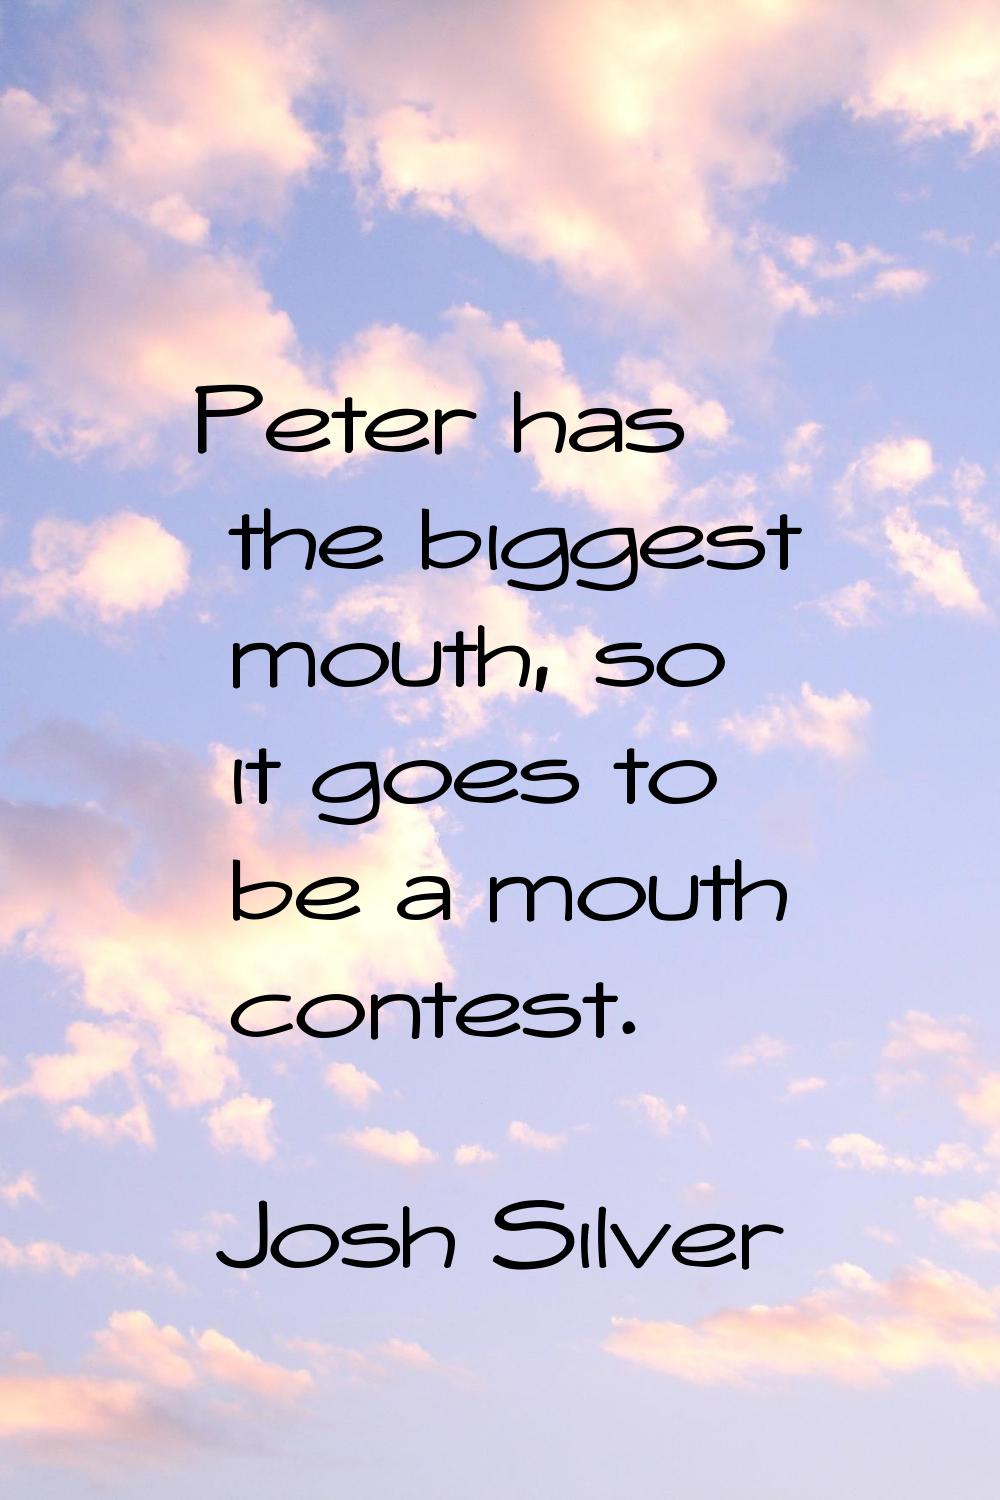 Peter has the biggest mouth, so it goes to be a mouth contest.